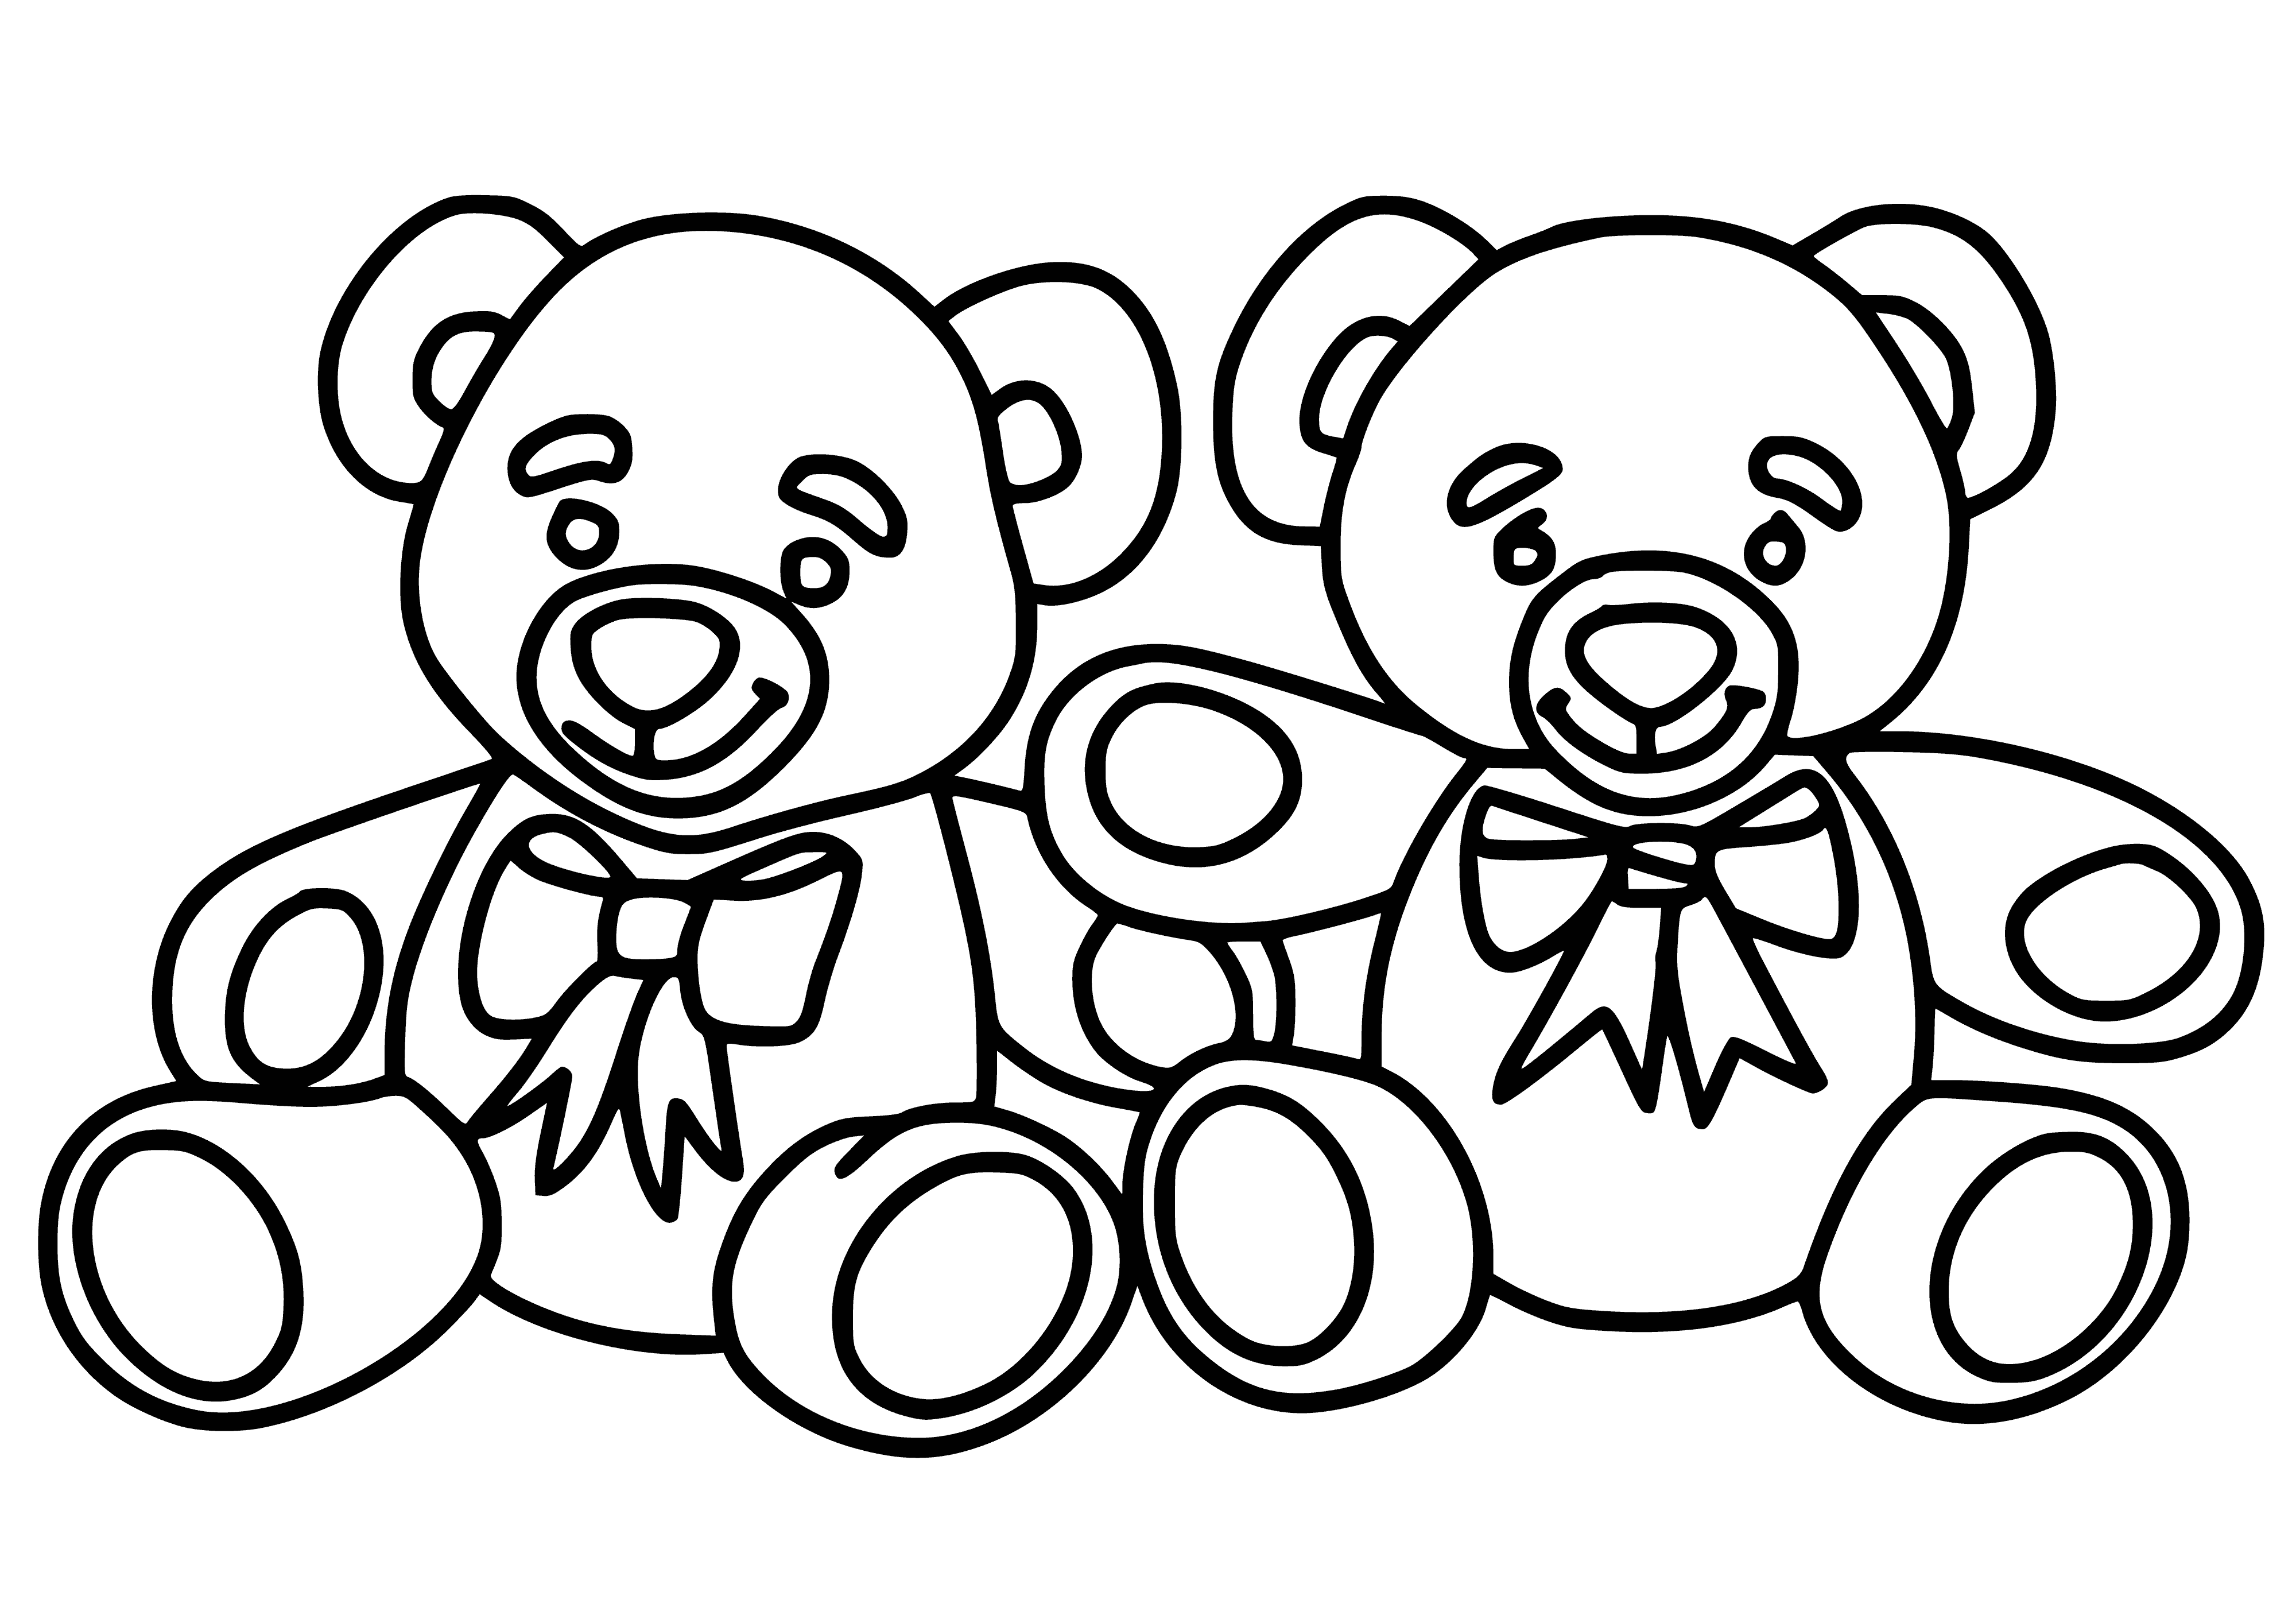 coloring page: Mice assembled to watch a bird in the sky, in colors of brown, gray, white, and black.